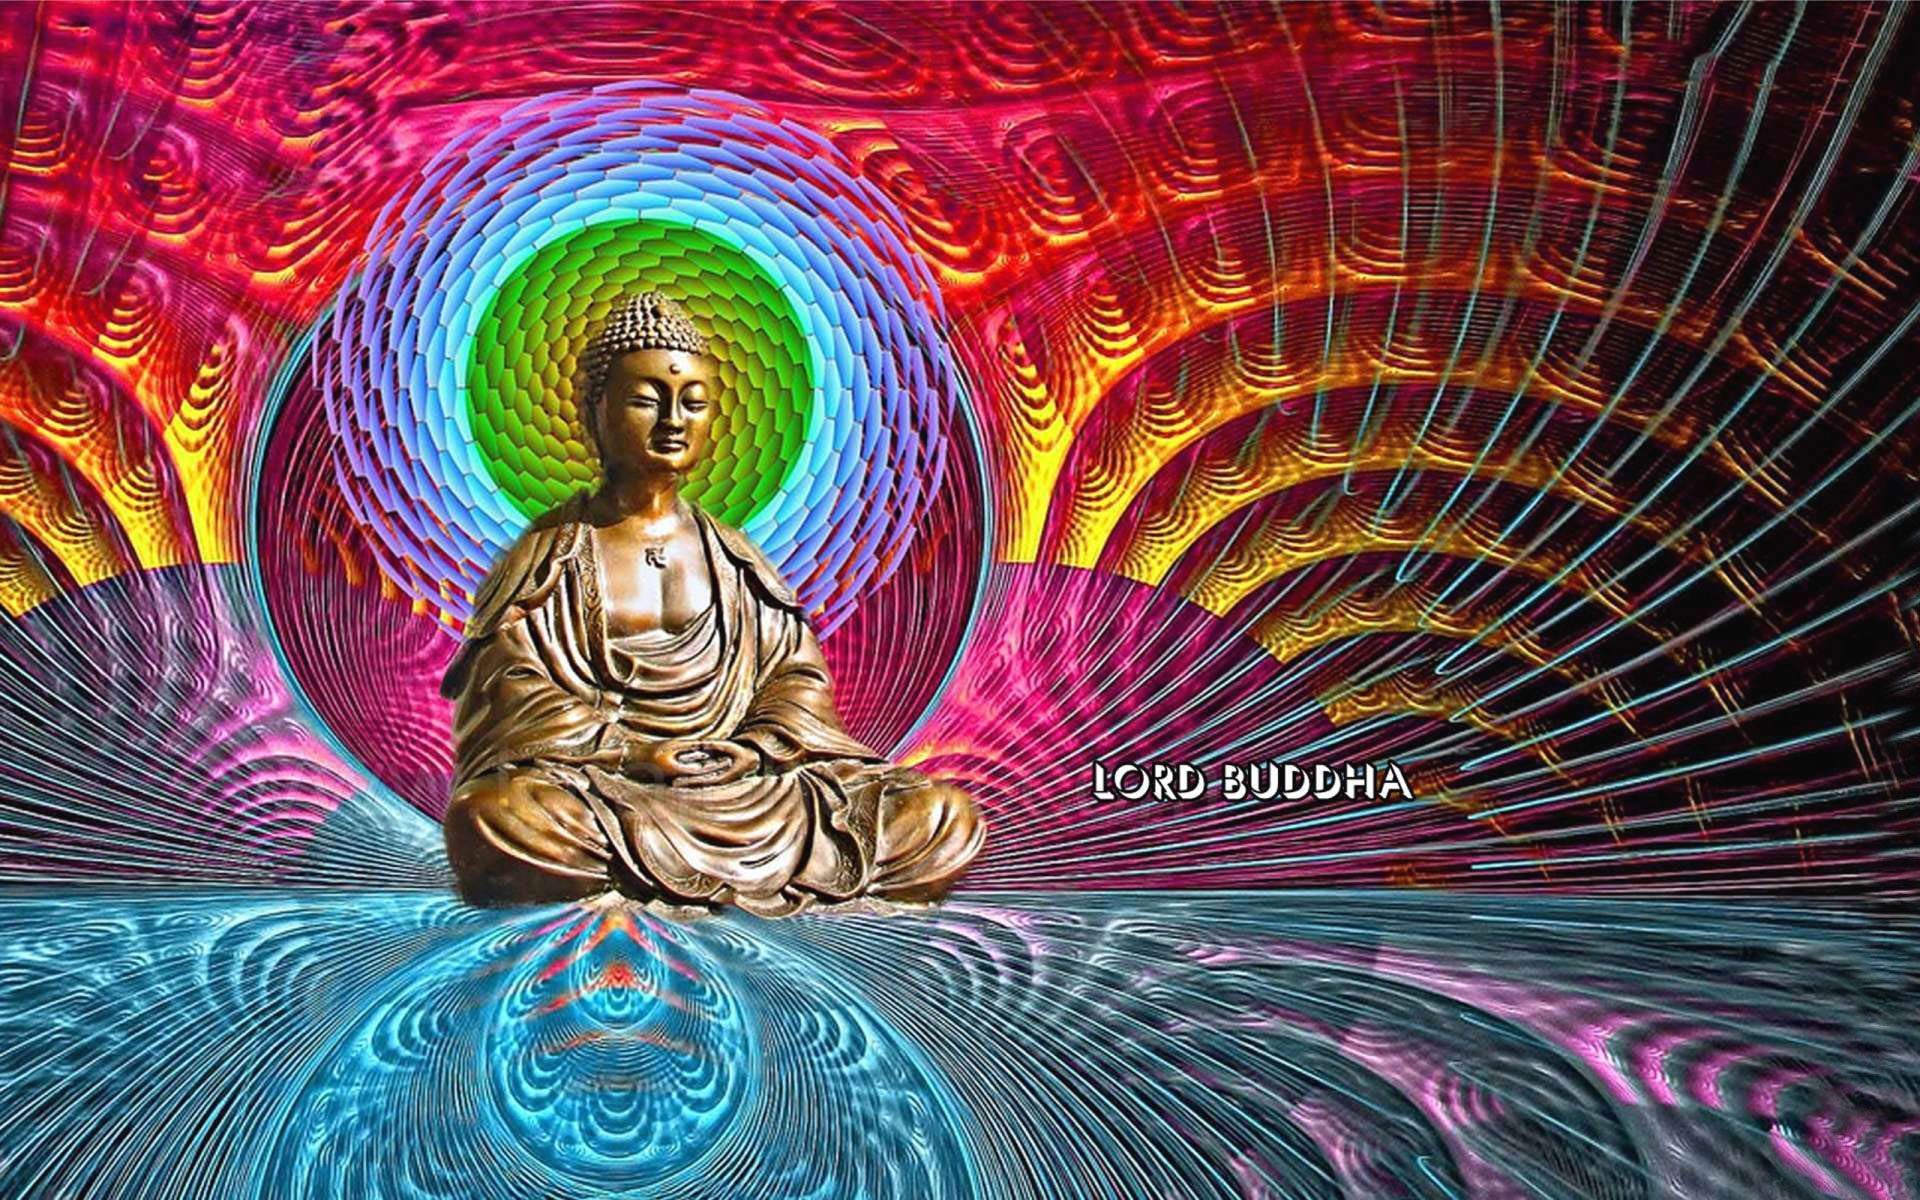 Lord Buddha Wallpapers, photos & images free download